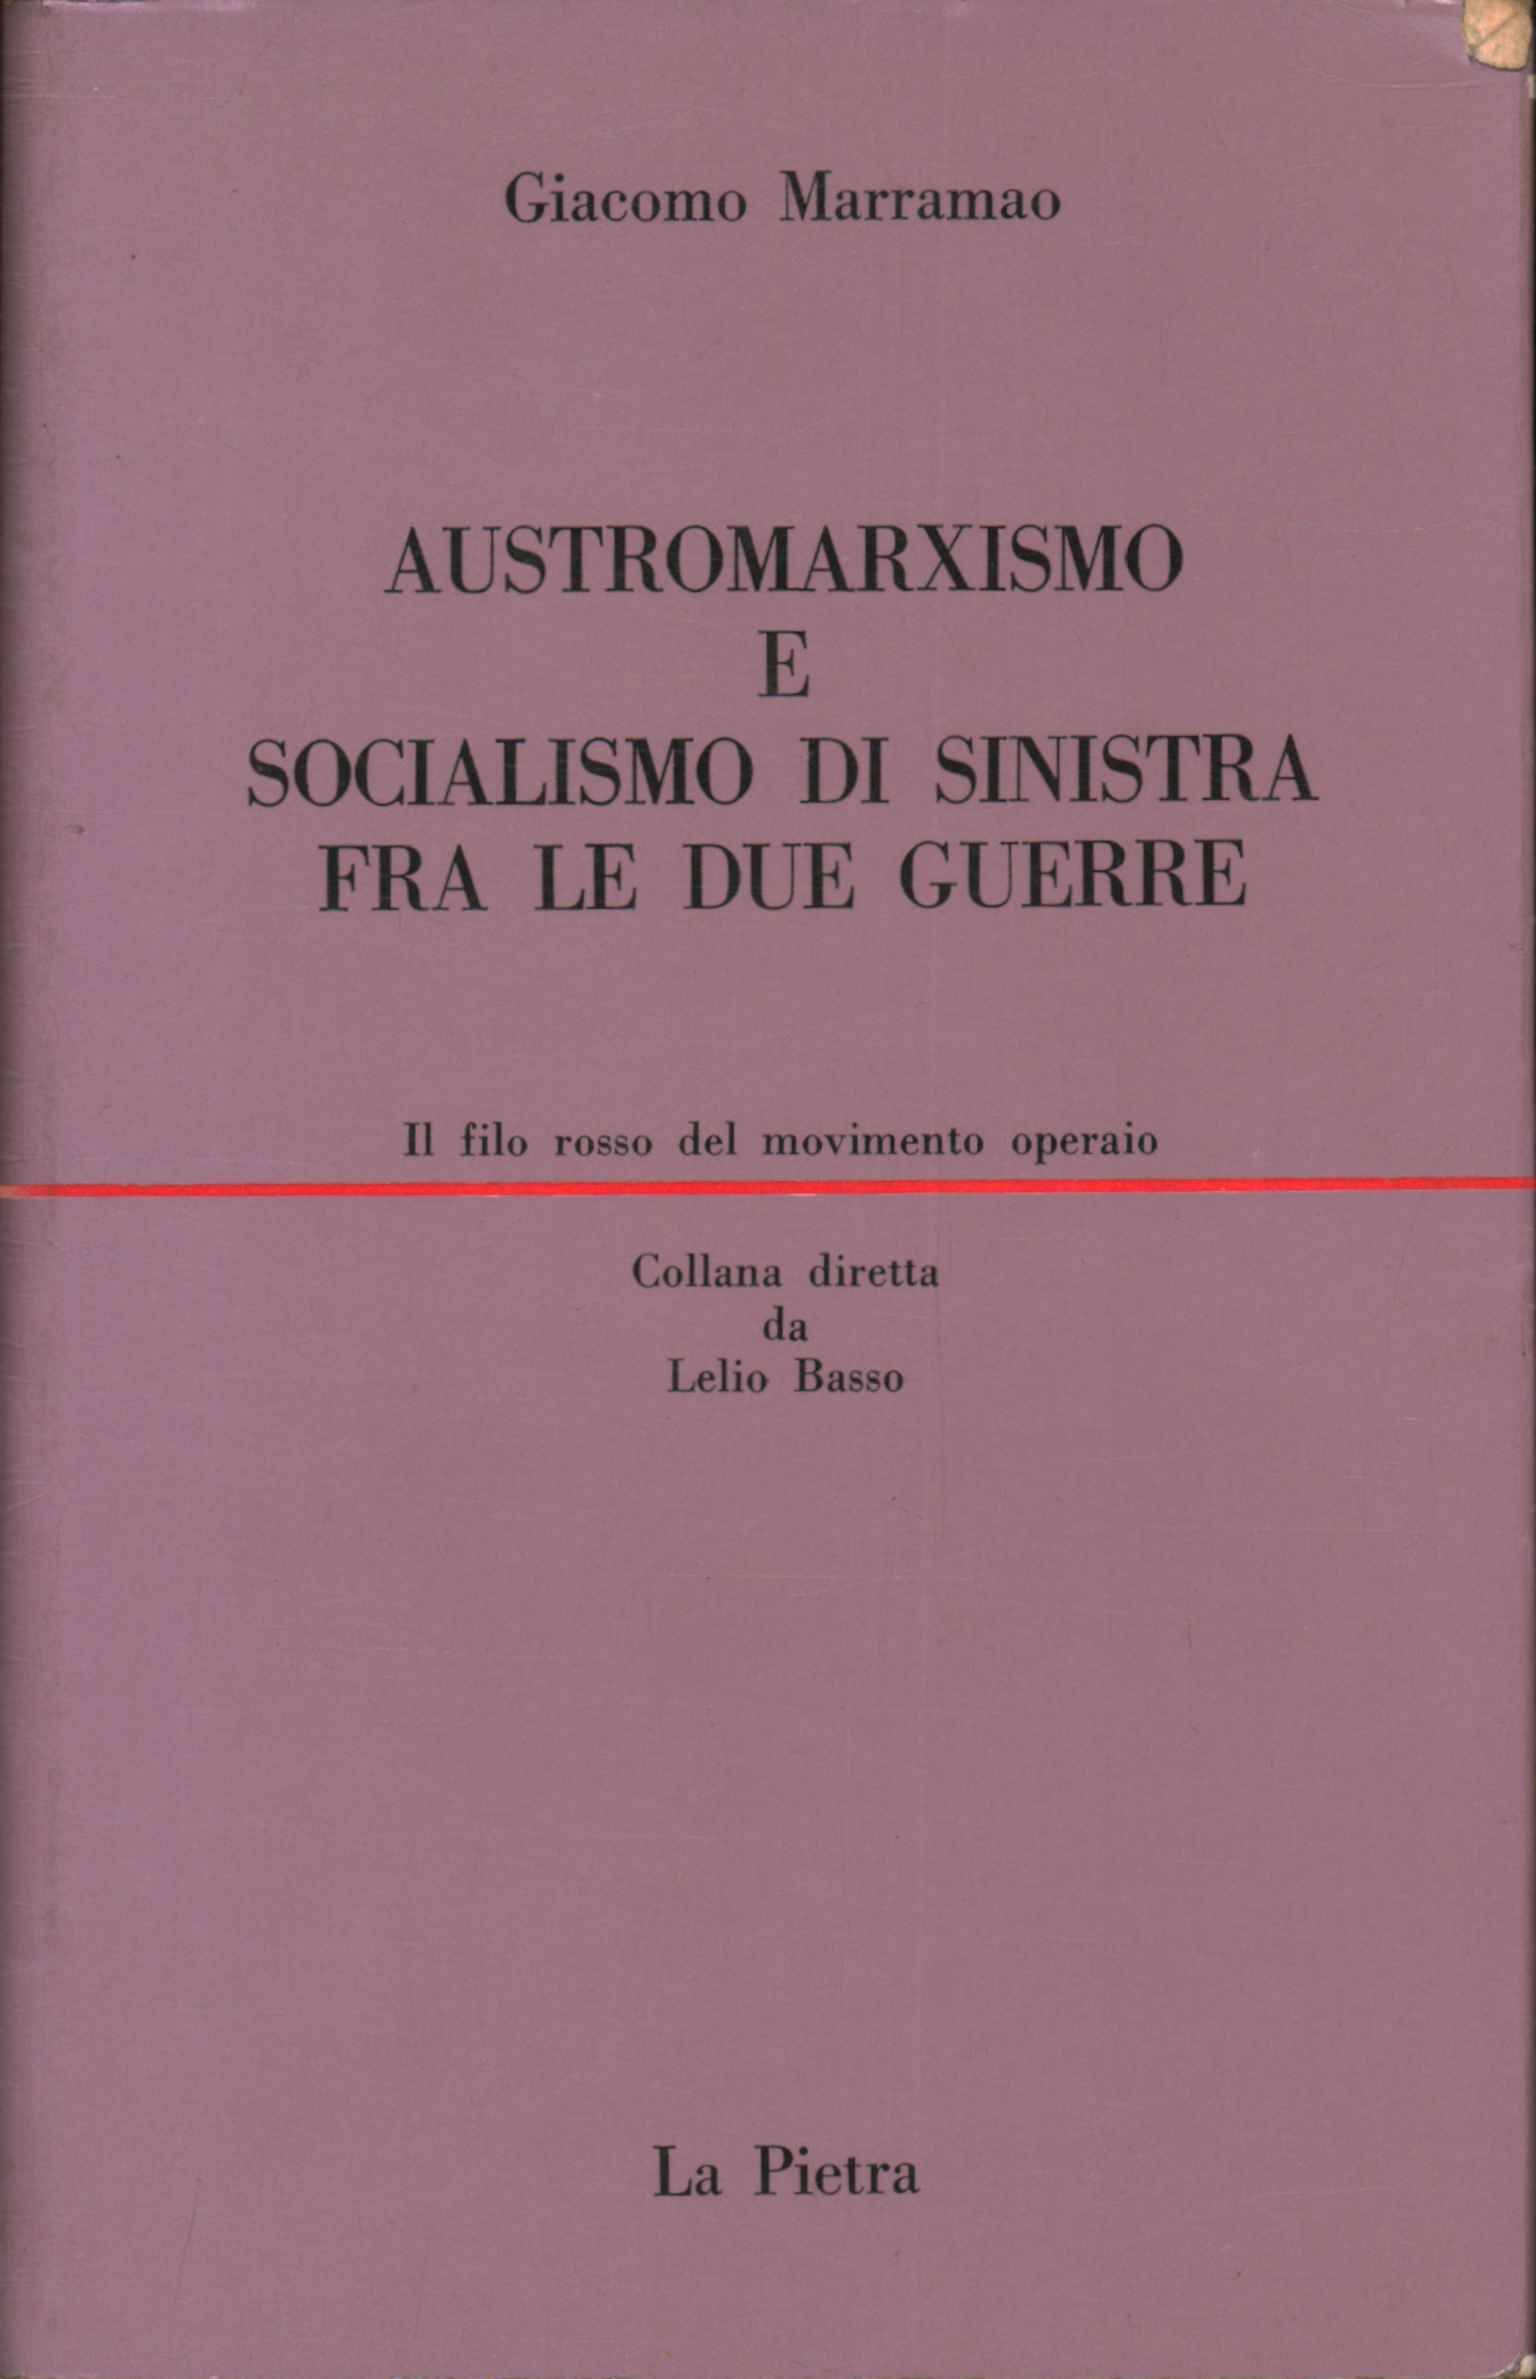 Austro-Marxism and left-wing socialism